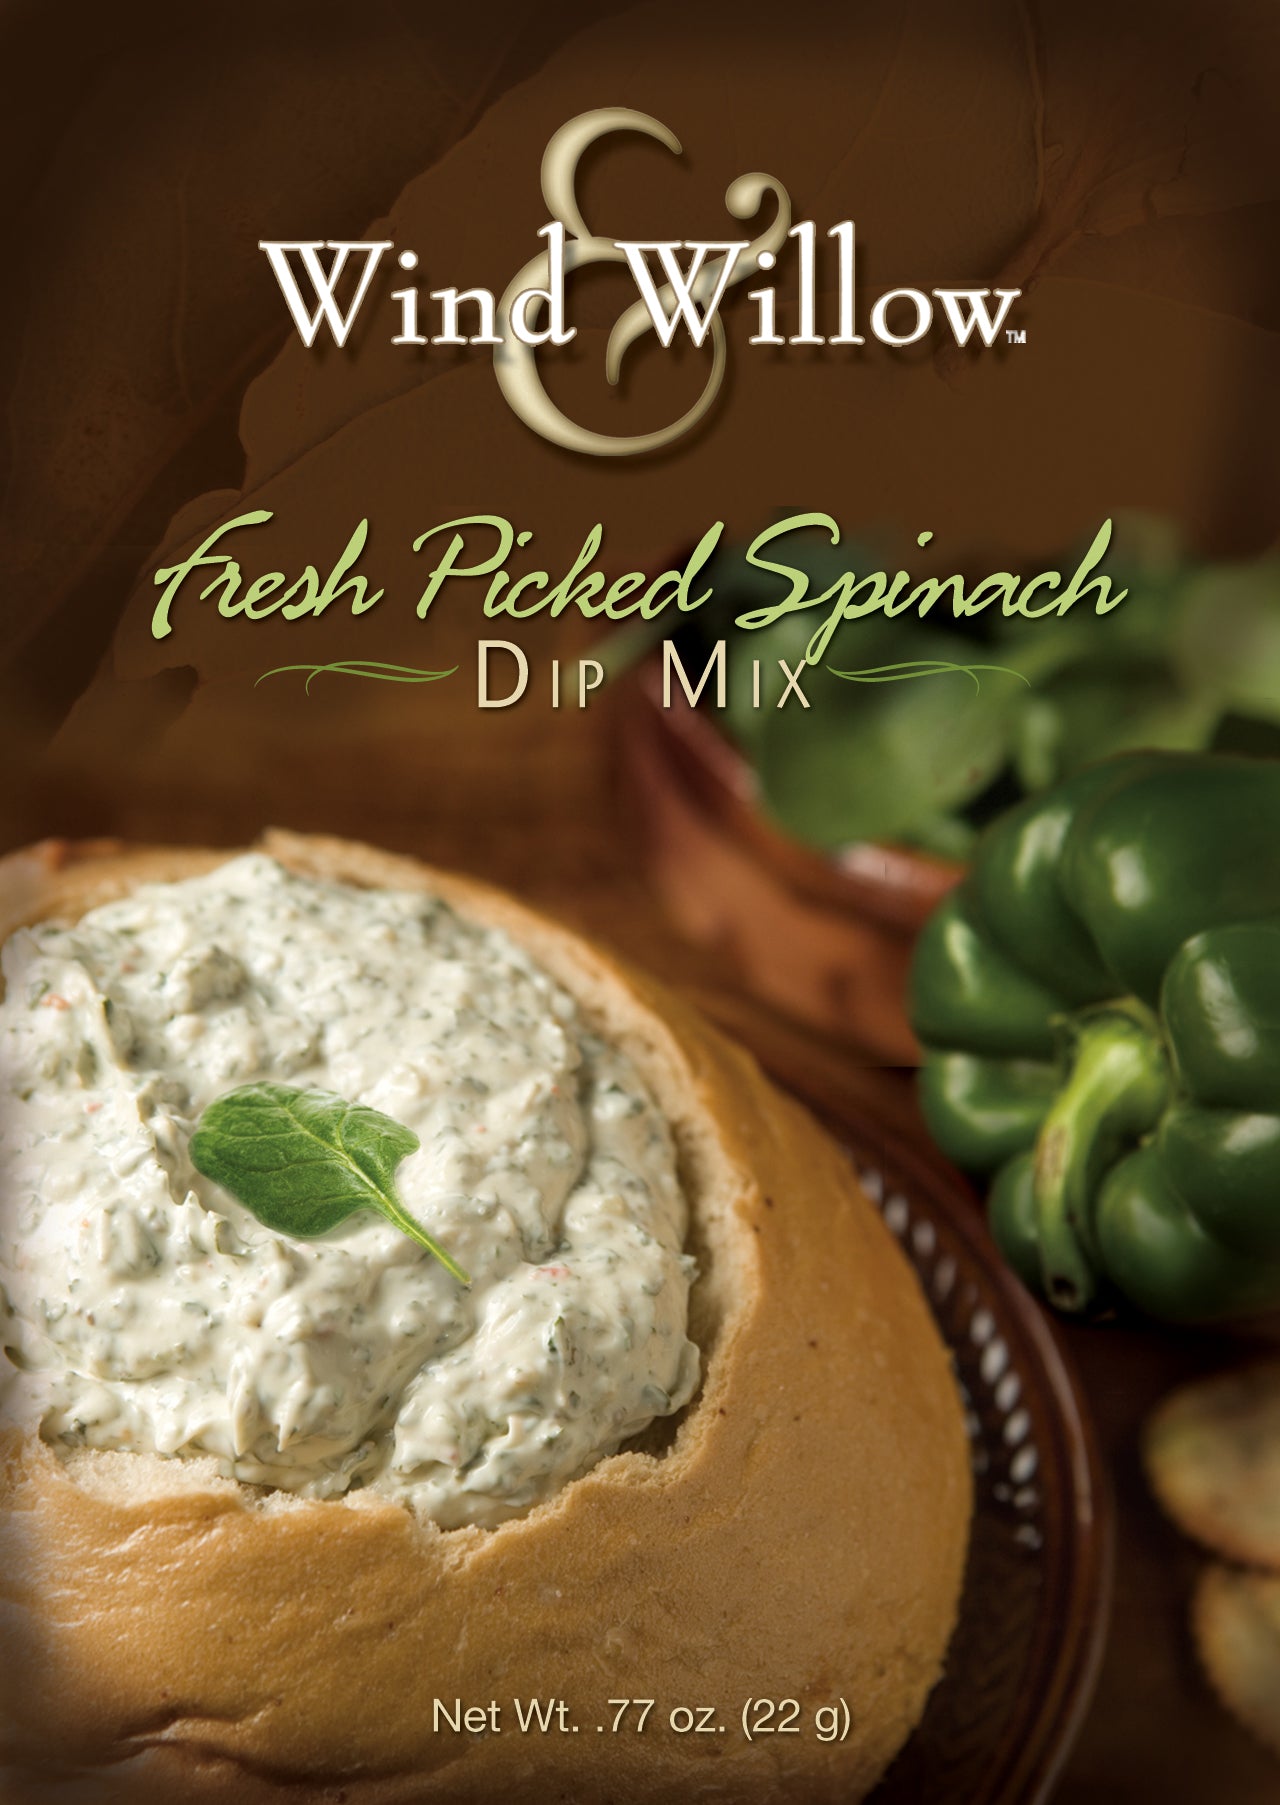 Fresh Picked Spinach, Dip Mix